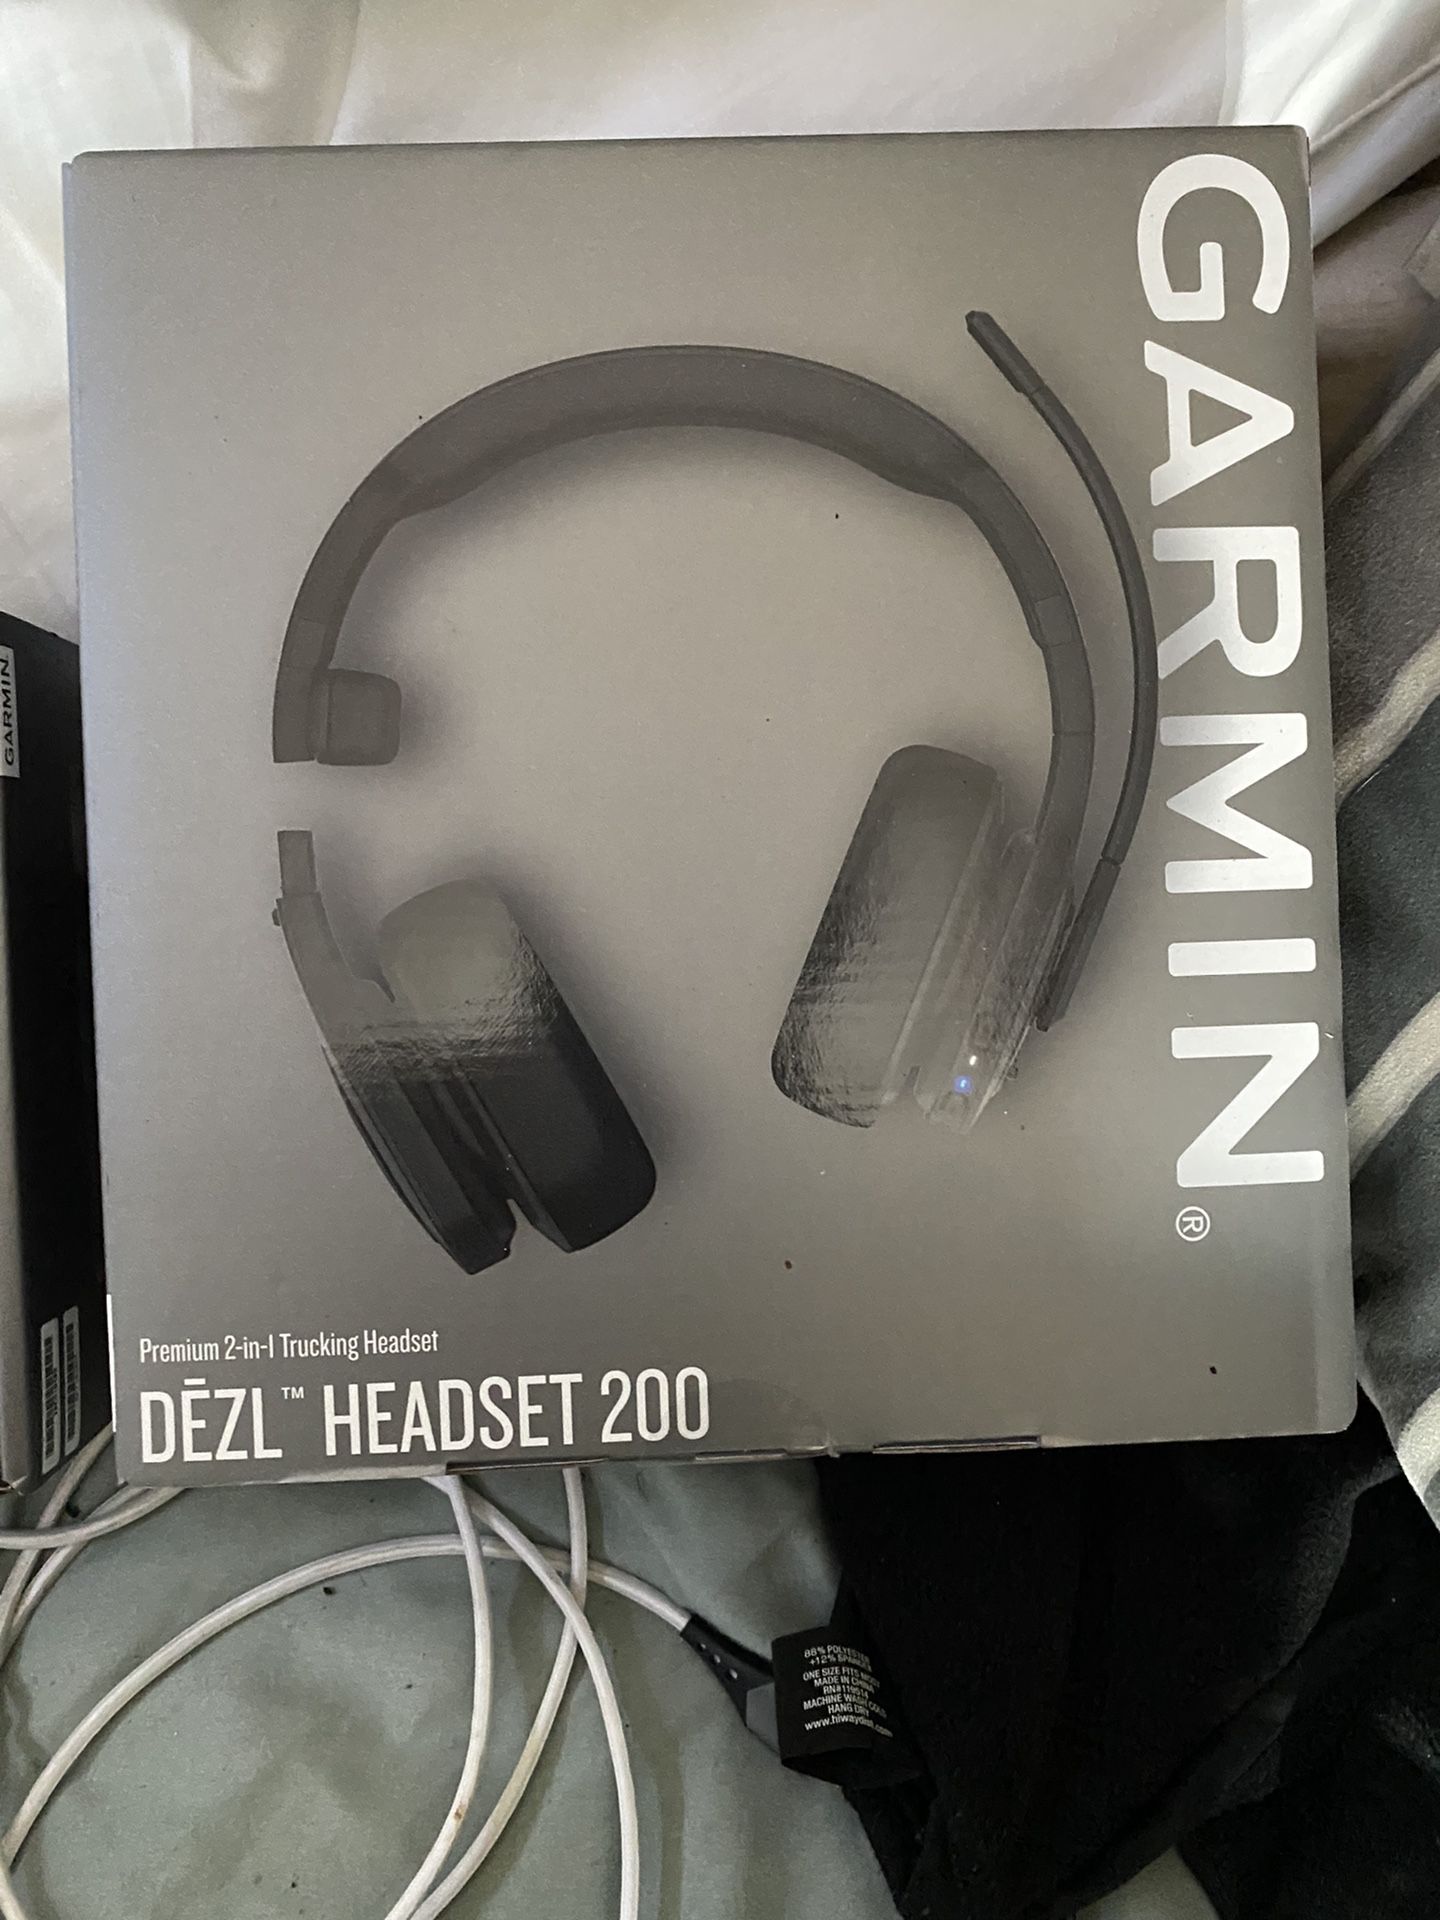 Garmin Headsets 100 And 200